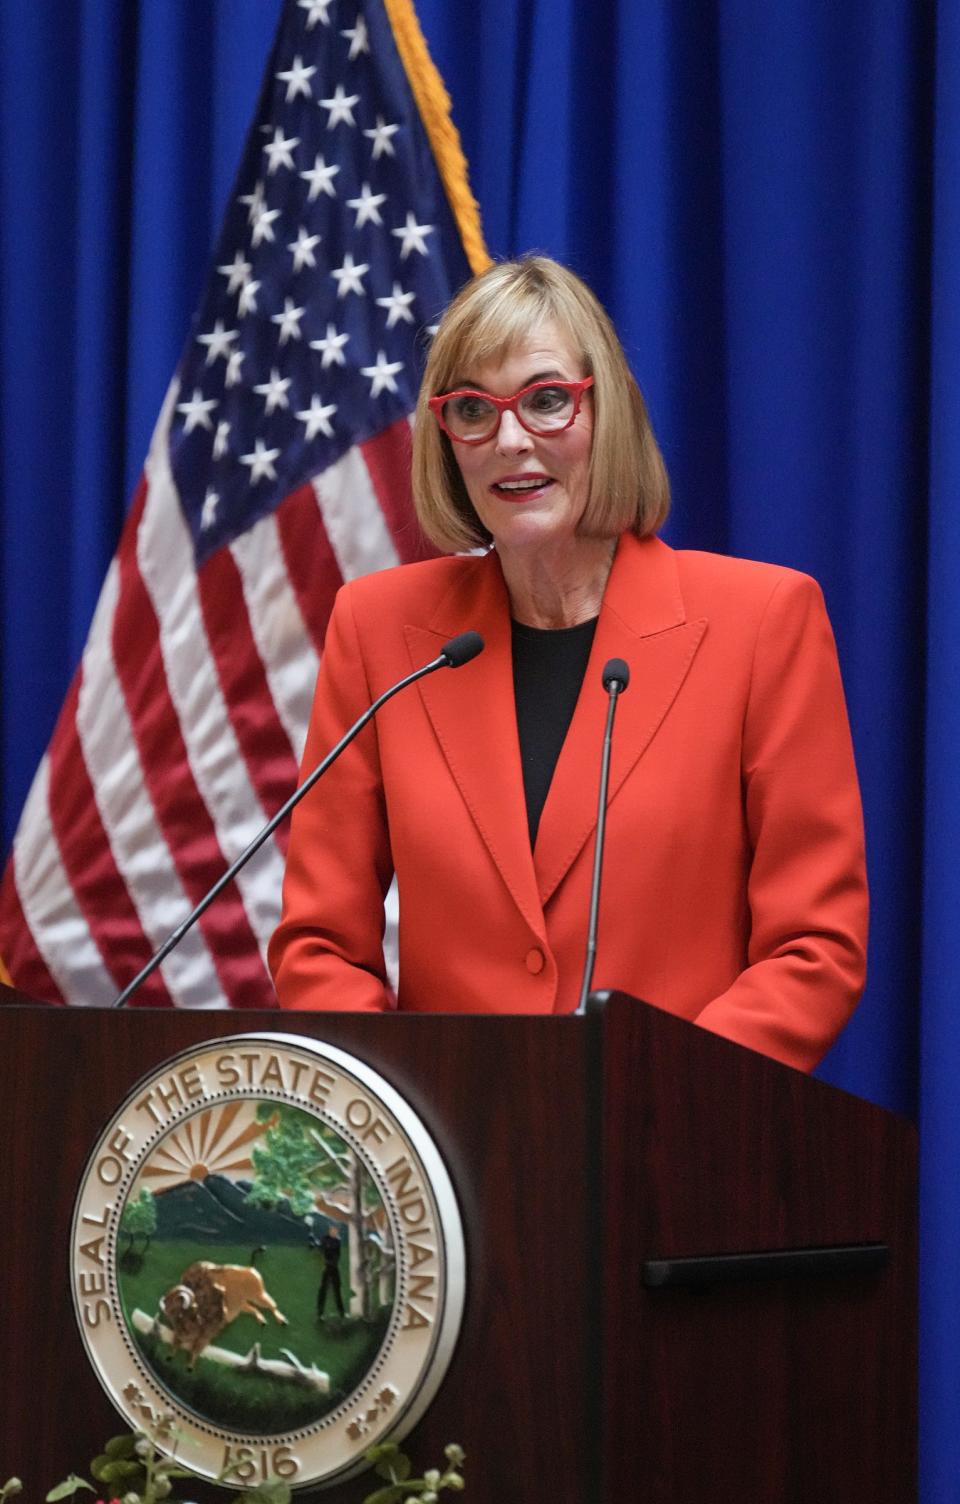 Lt. Gov. Suzanne Crouch speaks during Indiana's oath of office ceremony Monday, Jan. 9, 2023, at the Indiana Statehouse in Indianapolis.